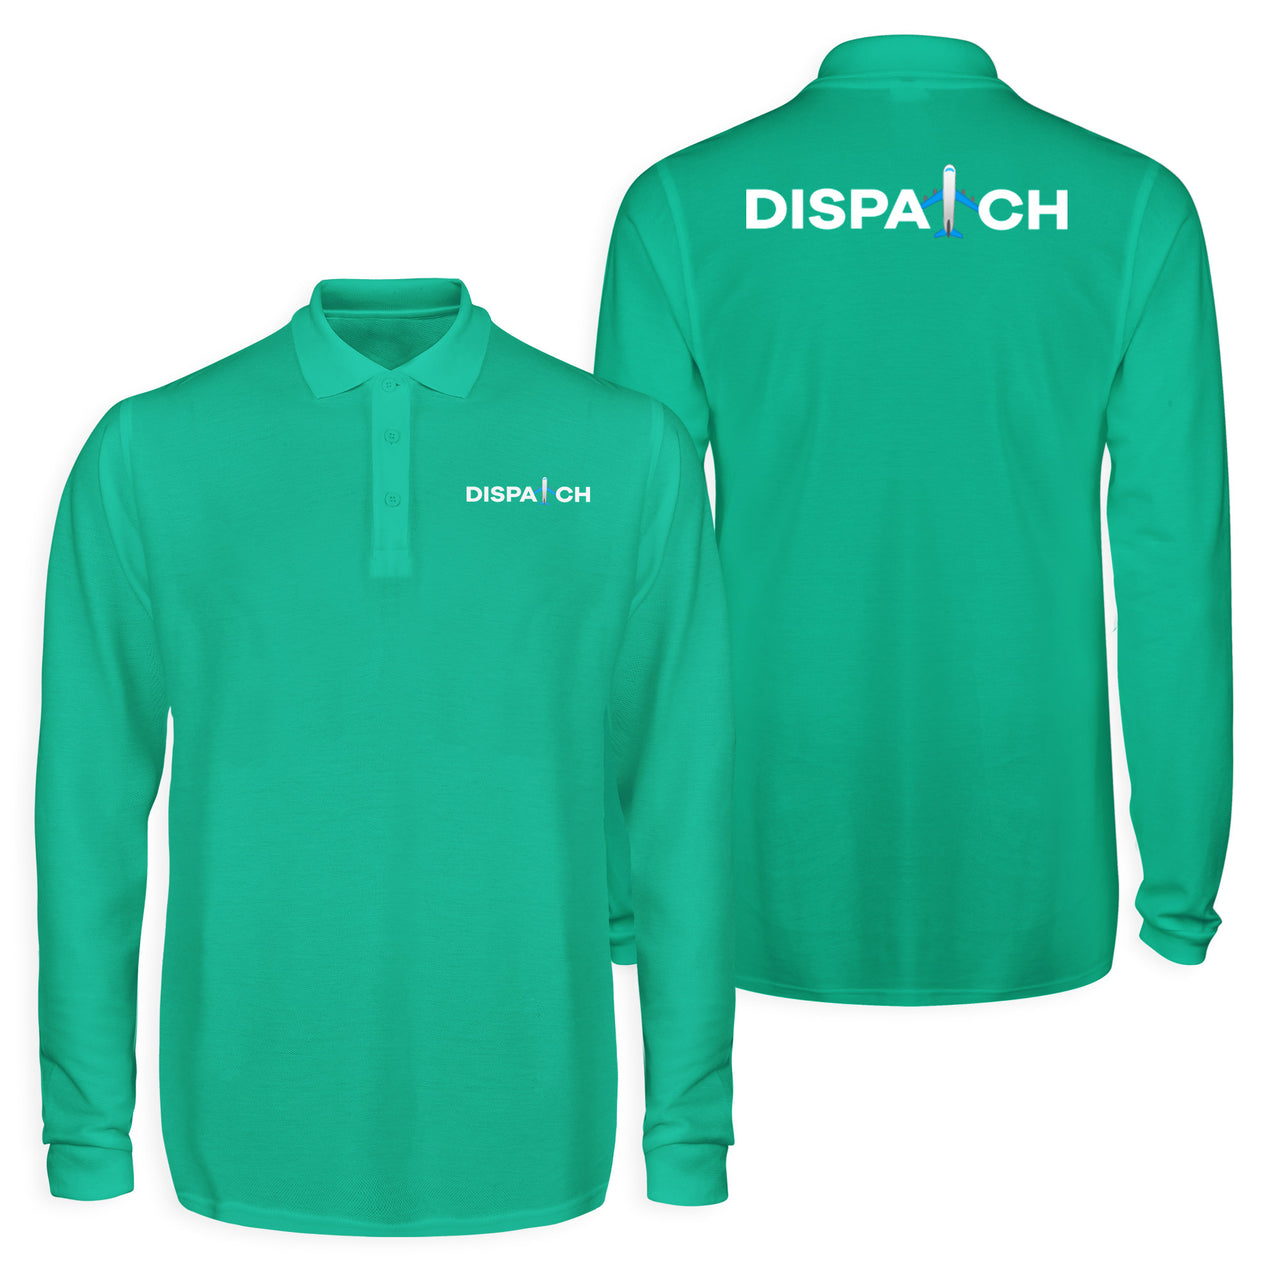 Dispatch Designed Long Sleeve Polo T-Shirts (Double-Side)